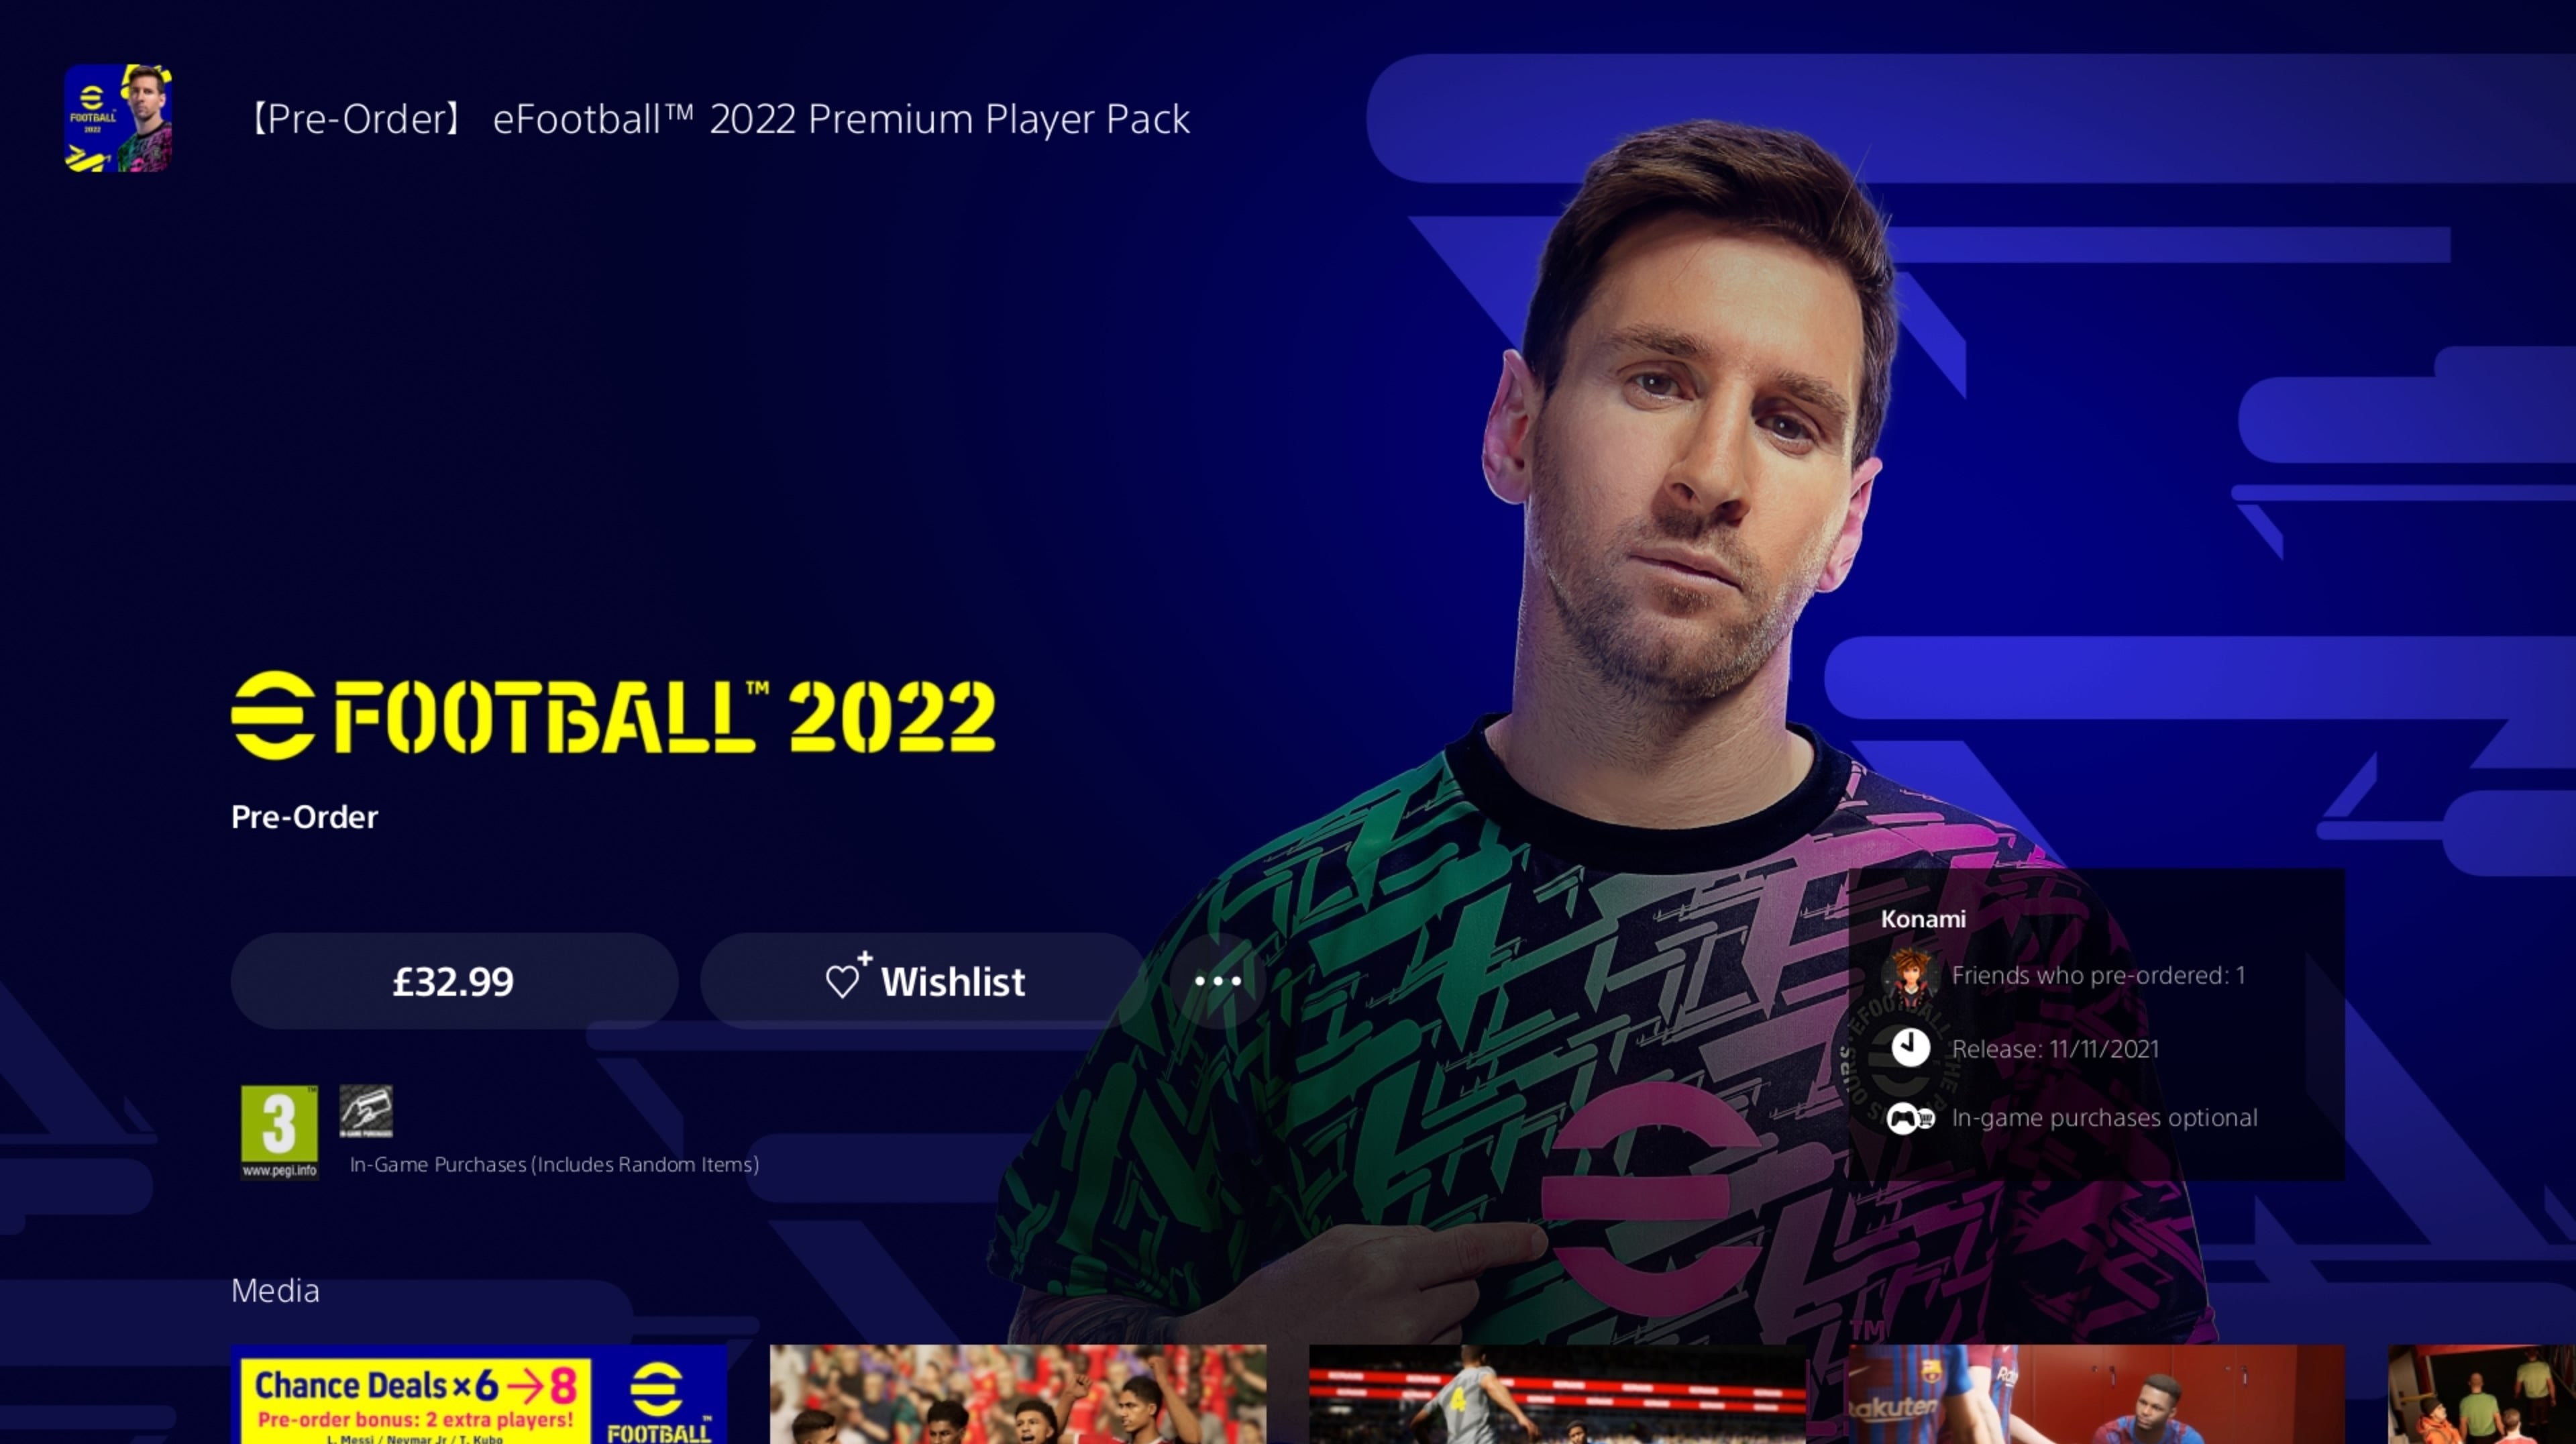 Image for Konami selling a £33 eFootball premium player pack you can't use until November